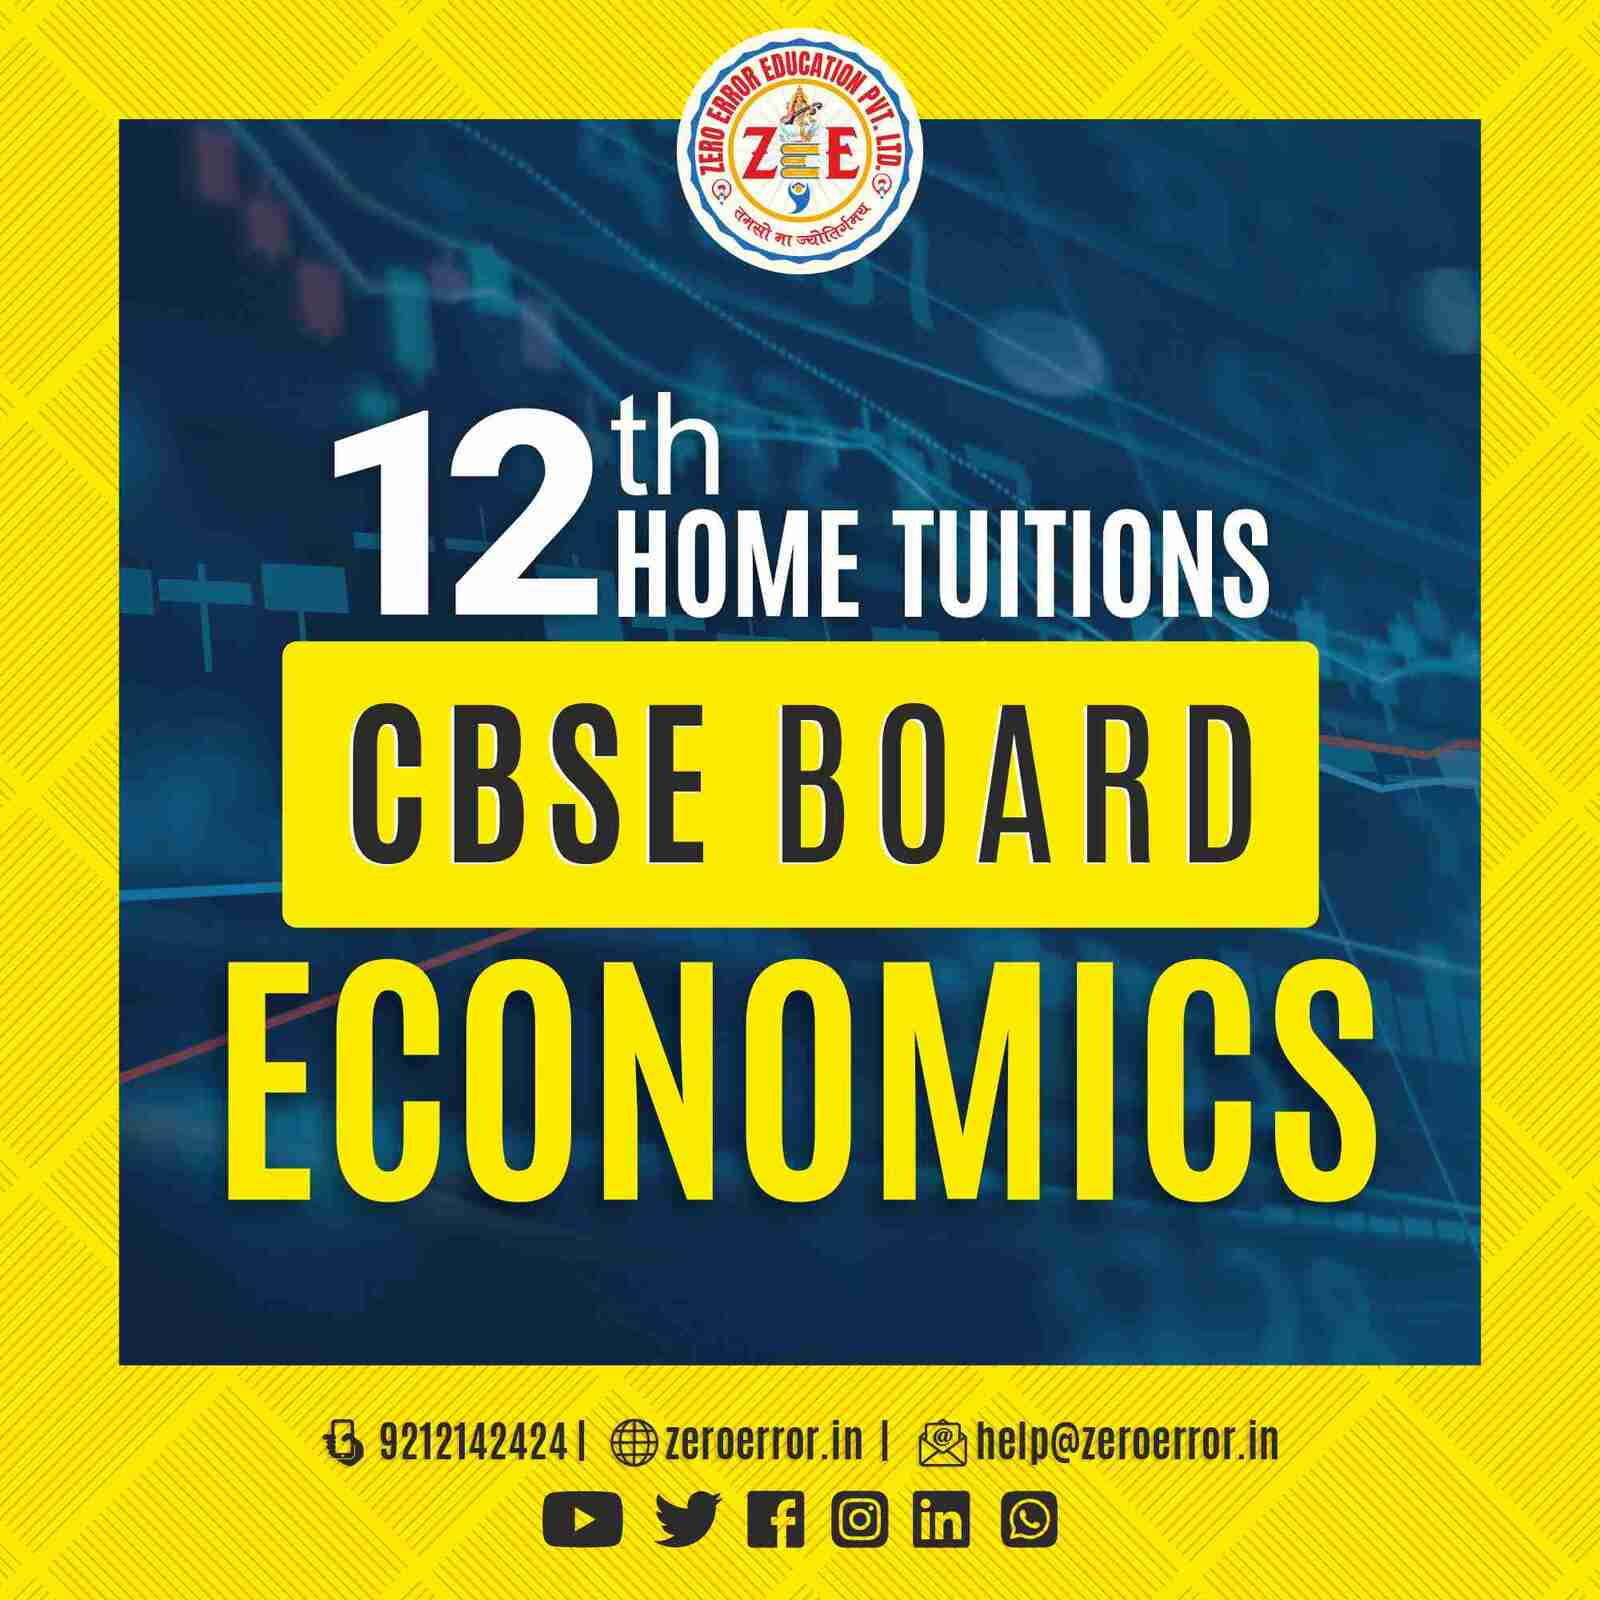 12th Grade CBSE Economics Online Classes by Zero Error Education Prepare for your CBSE board exams with online and offline Economics classes for 12th grade. Learn from experienced home tutors and get all the help you need to succeed. Enroll today at Zero Error Education. [https://zeroerror.in/] Call 9212142424 for more information.